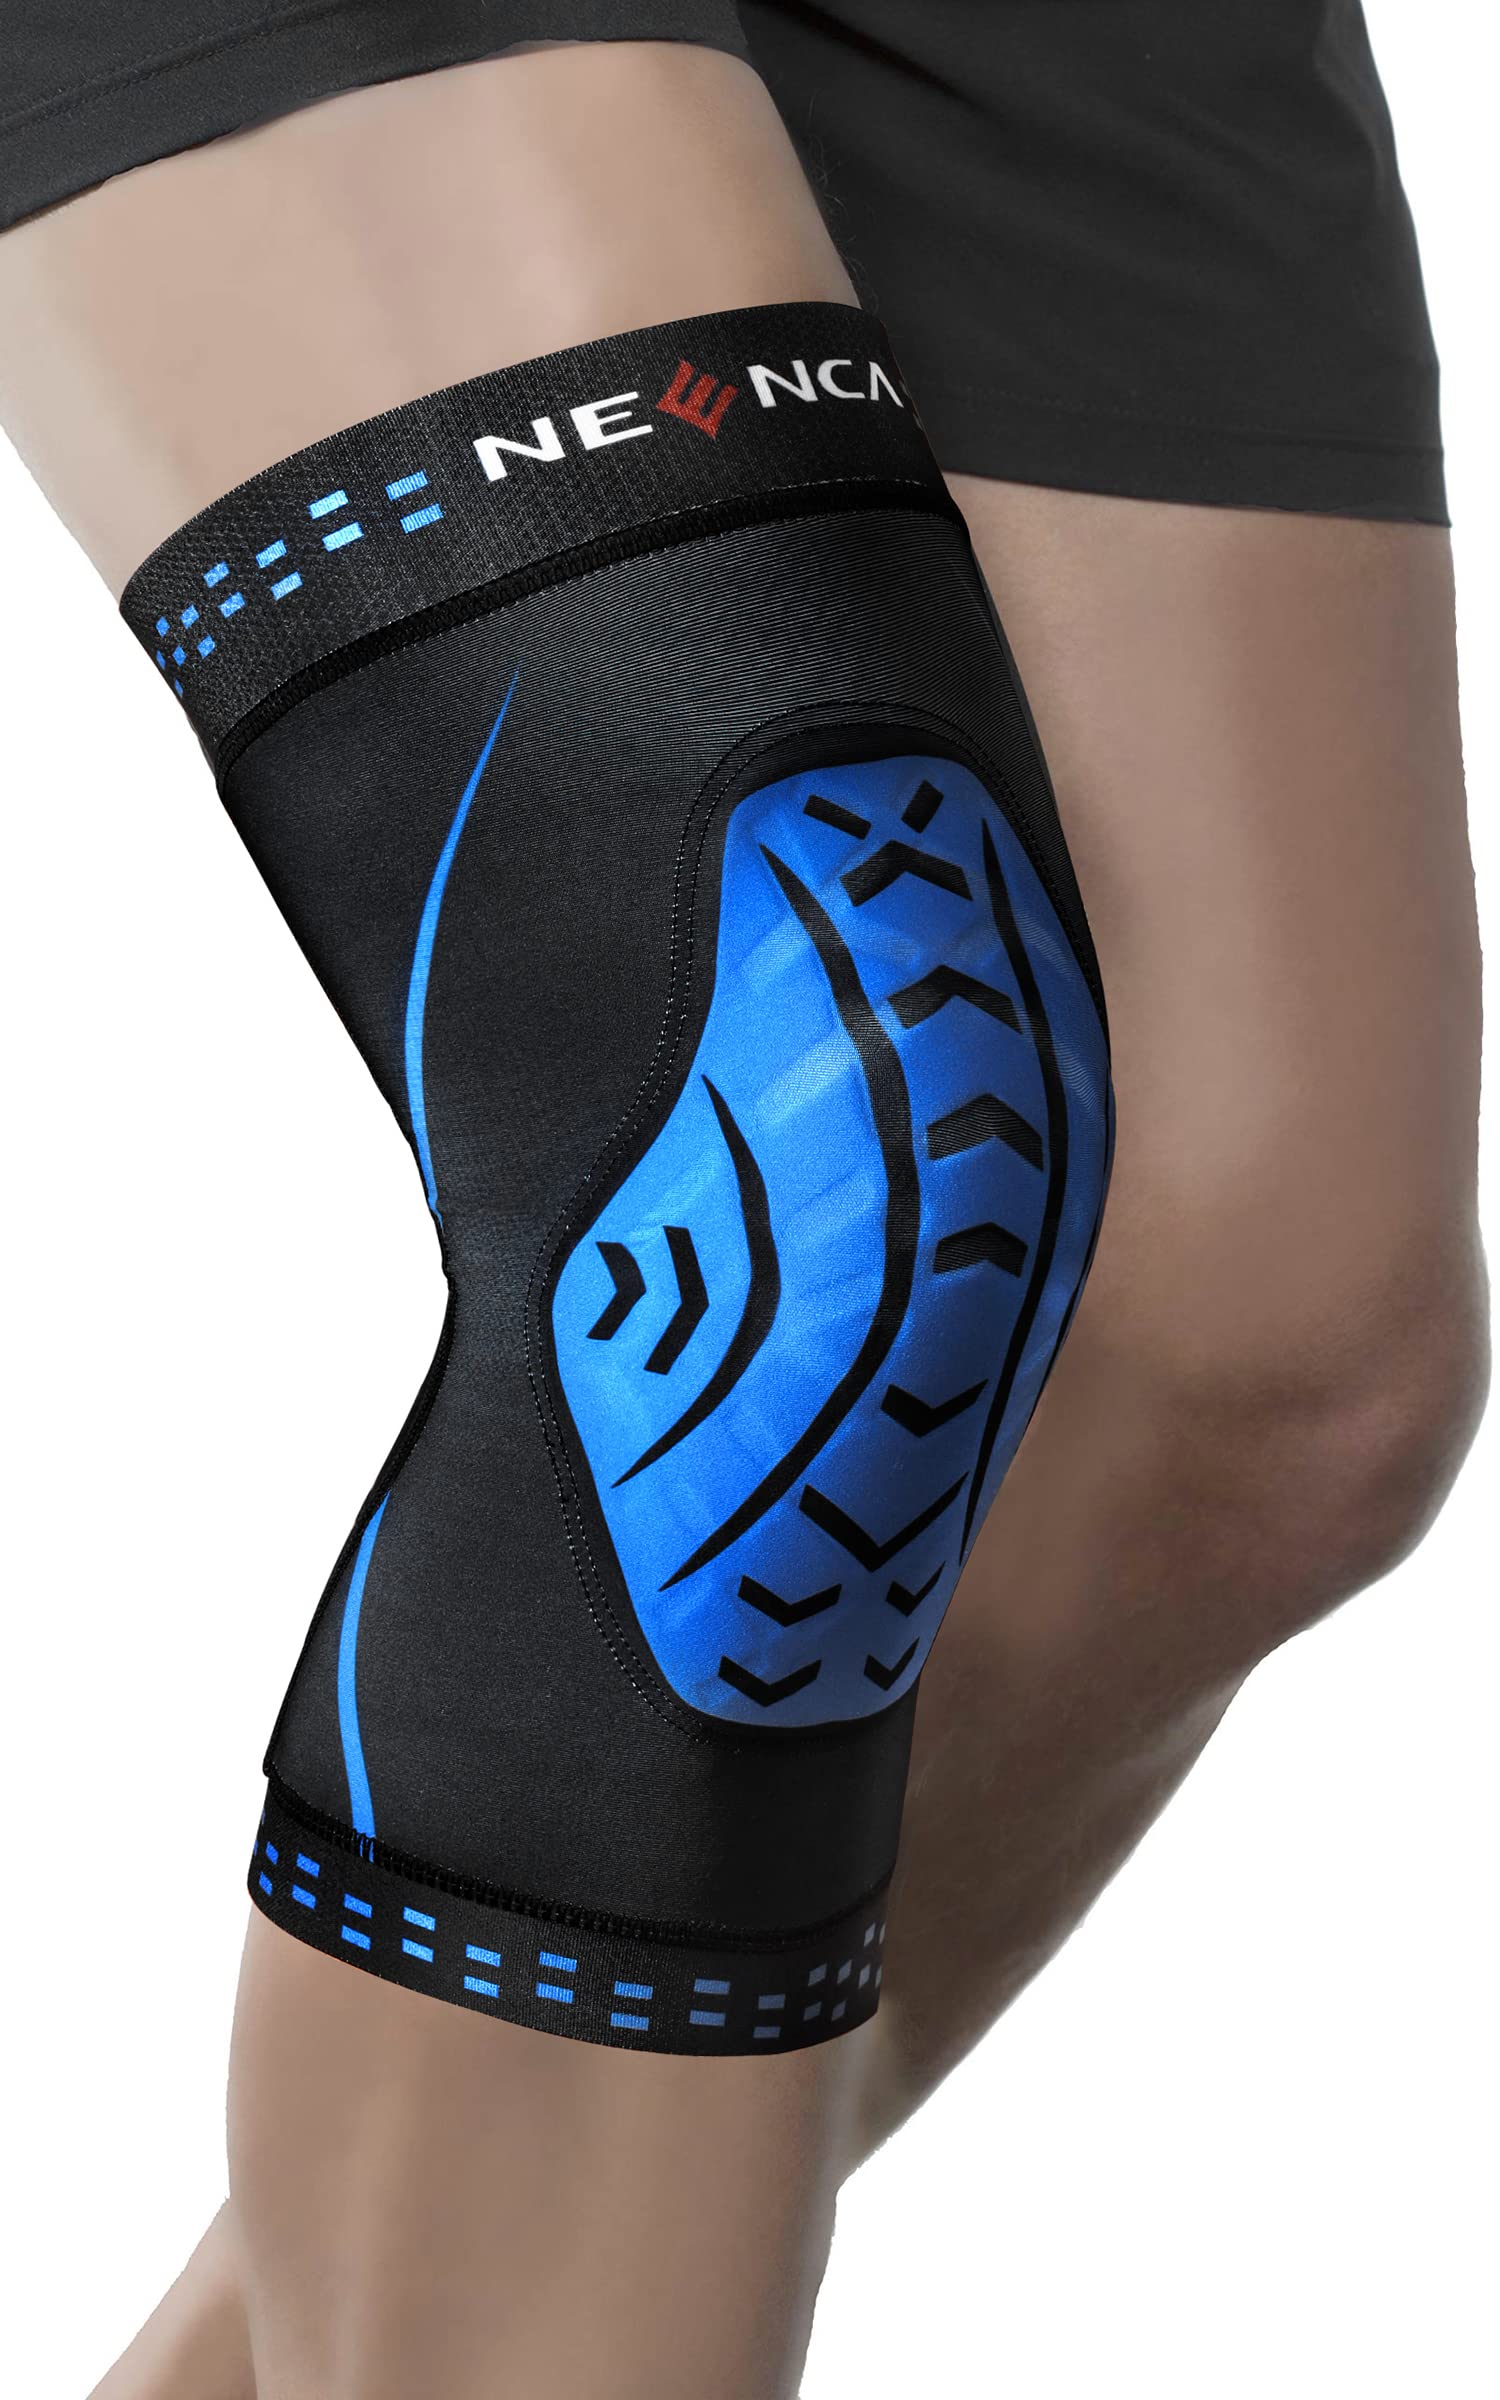  NEENCA Professional Knee Brace For Pain Relief, Medical Knee  Compression Sleeve, Knee Support